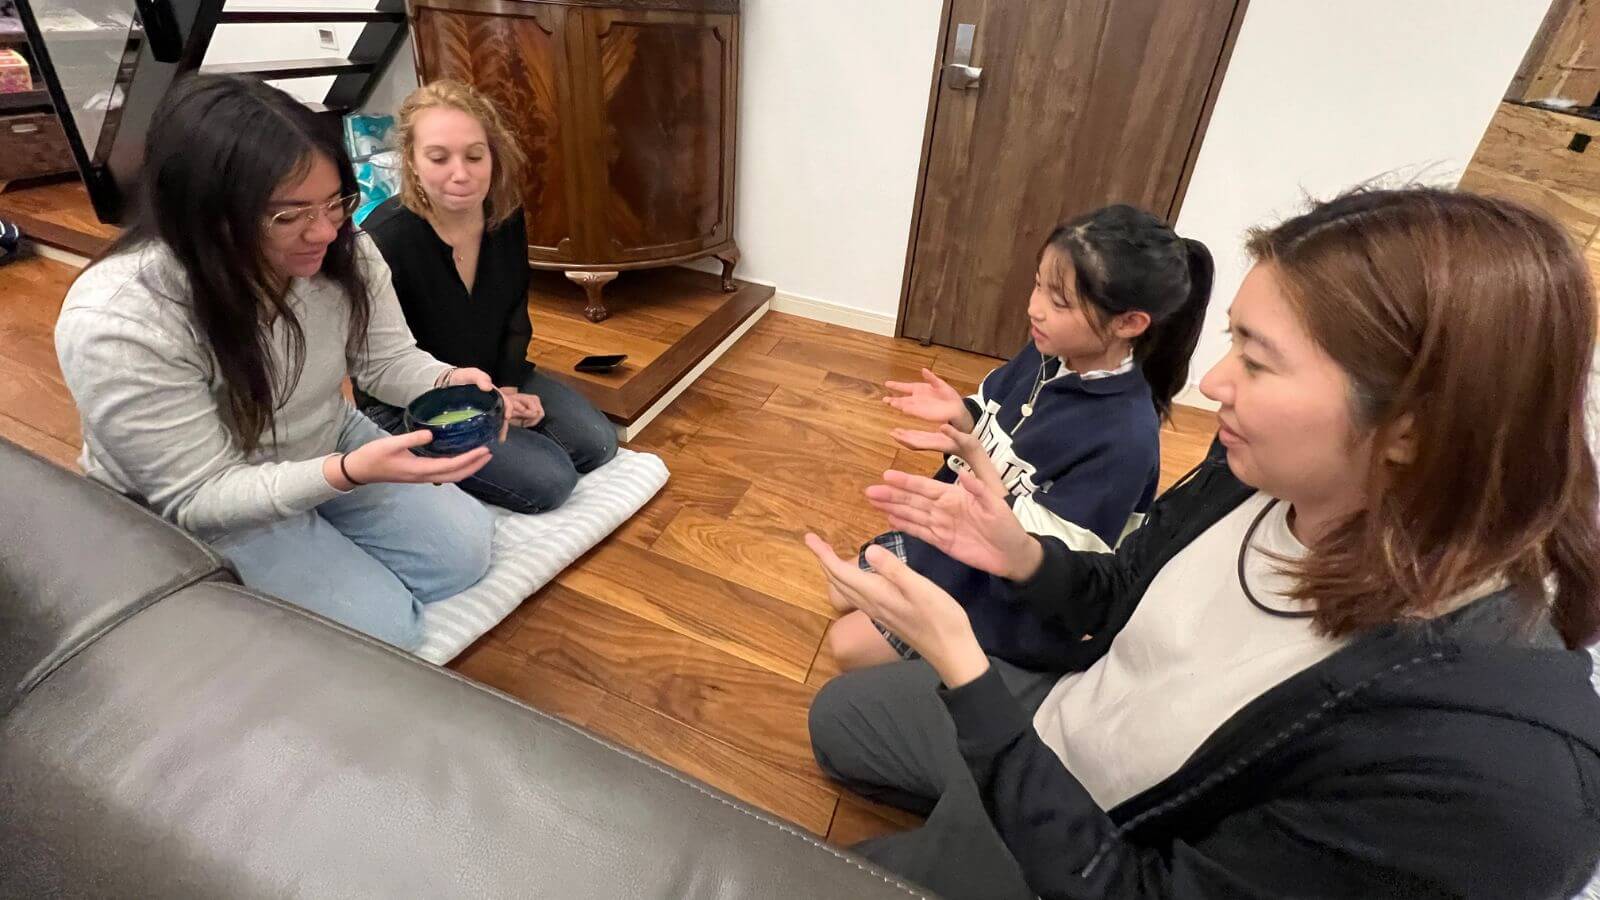 Emily Dodge having a traditional Japanese tea ceremony with her host family